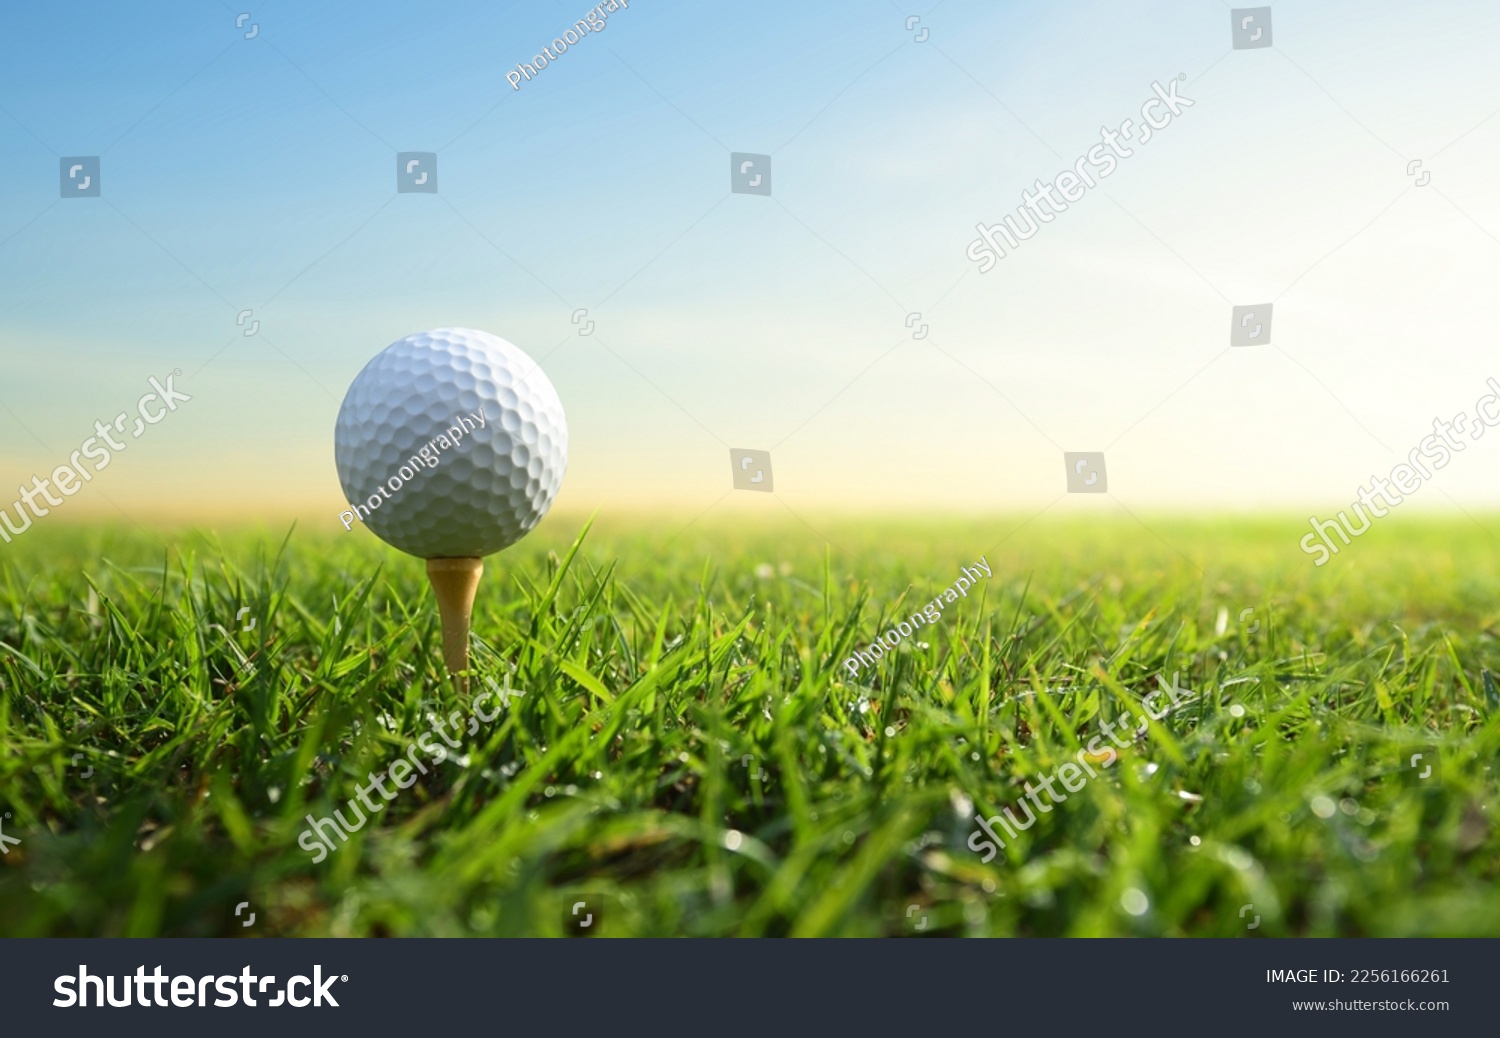 Golf ball on tee with sunrise  background. #2256166261